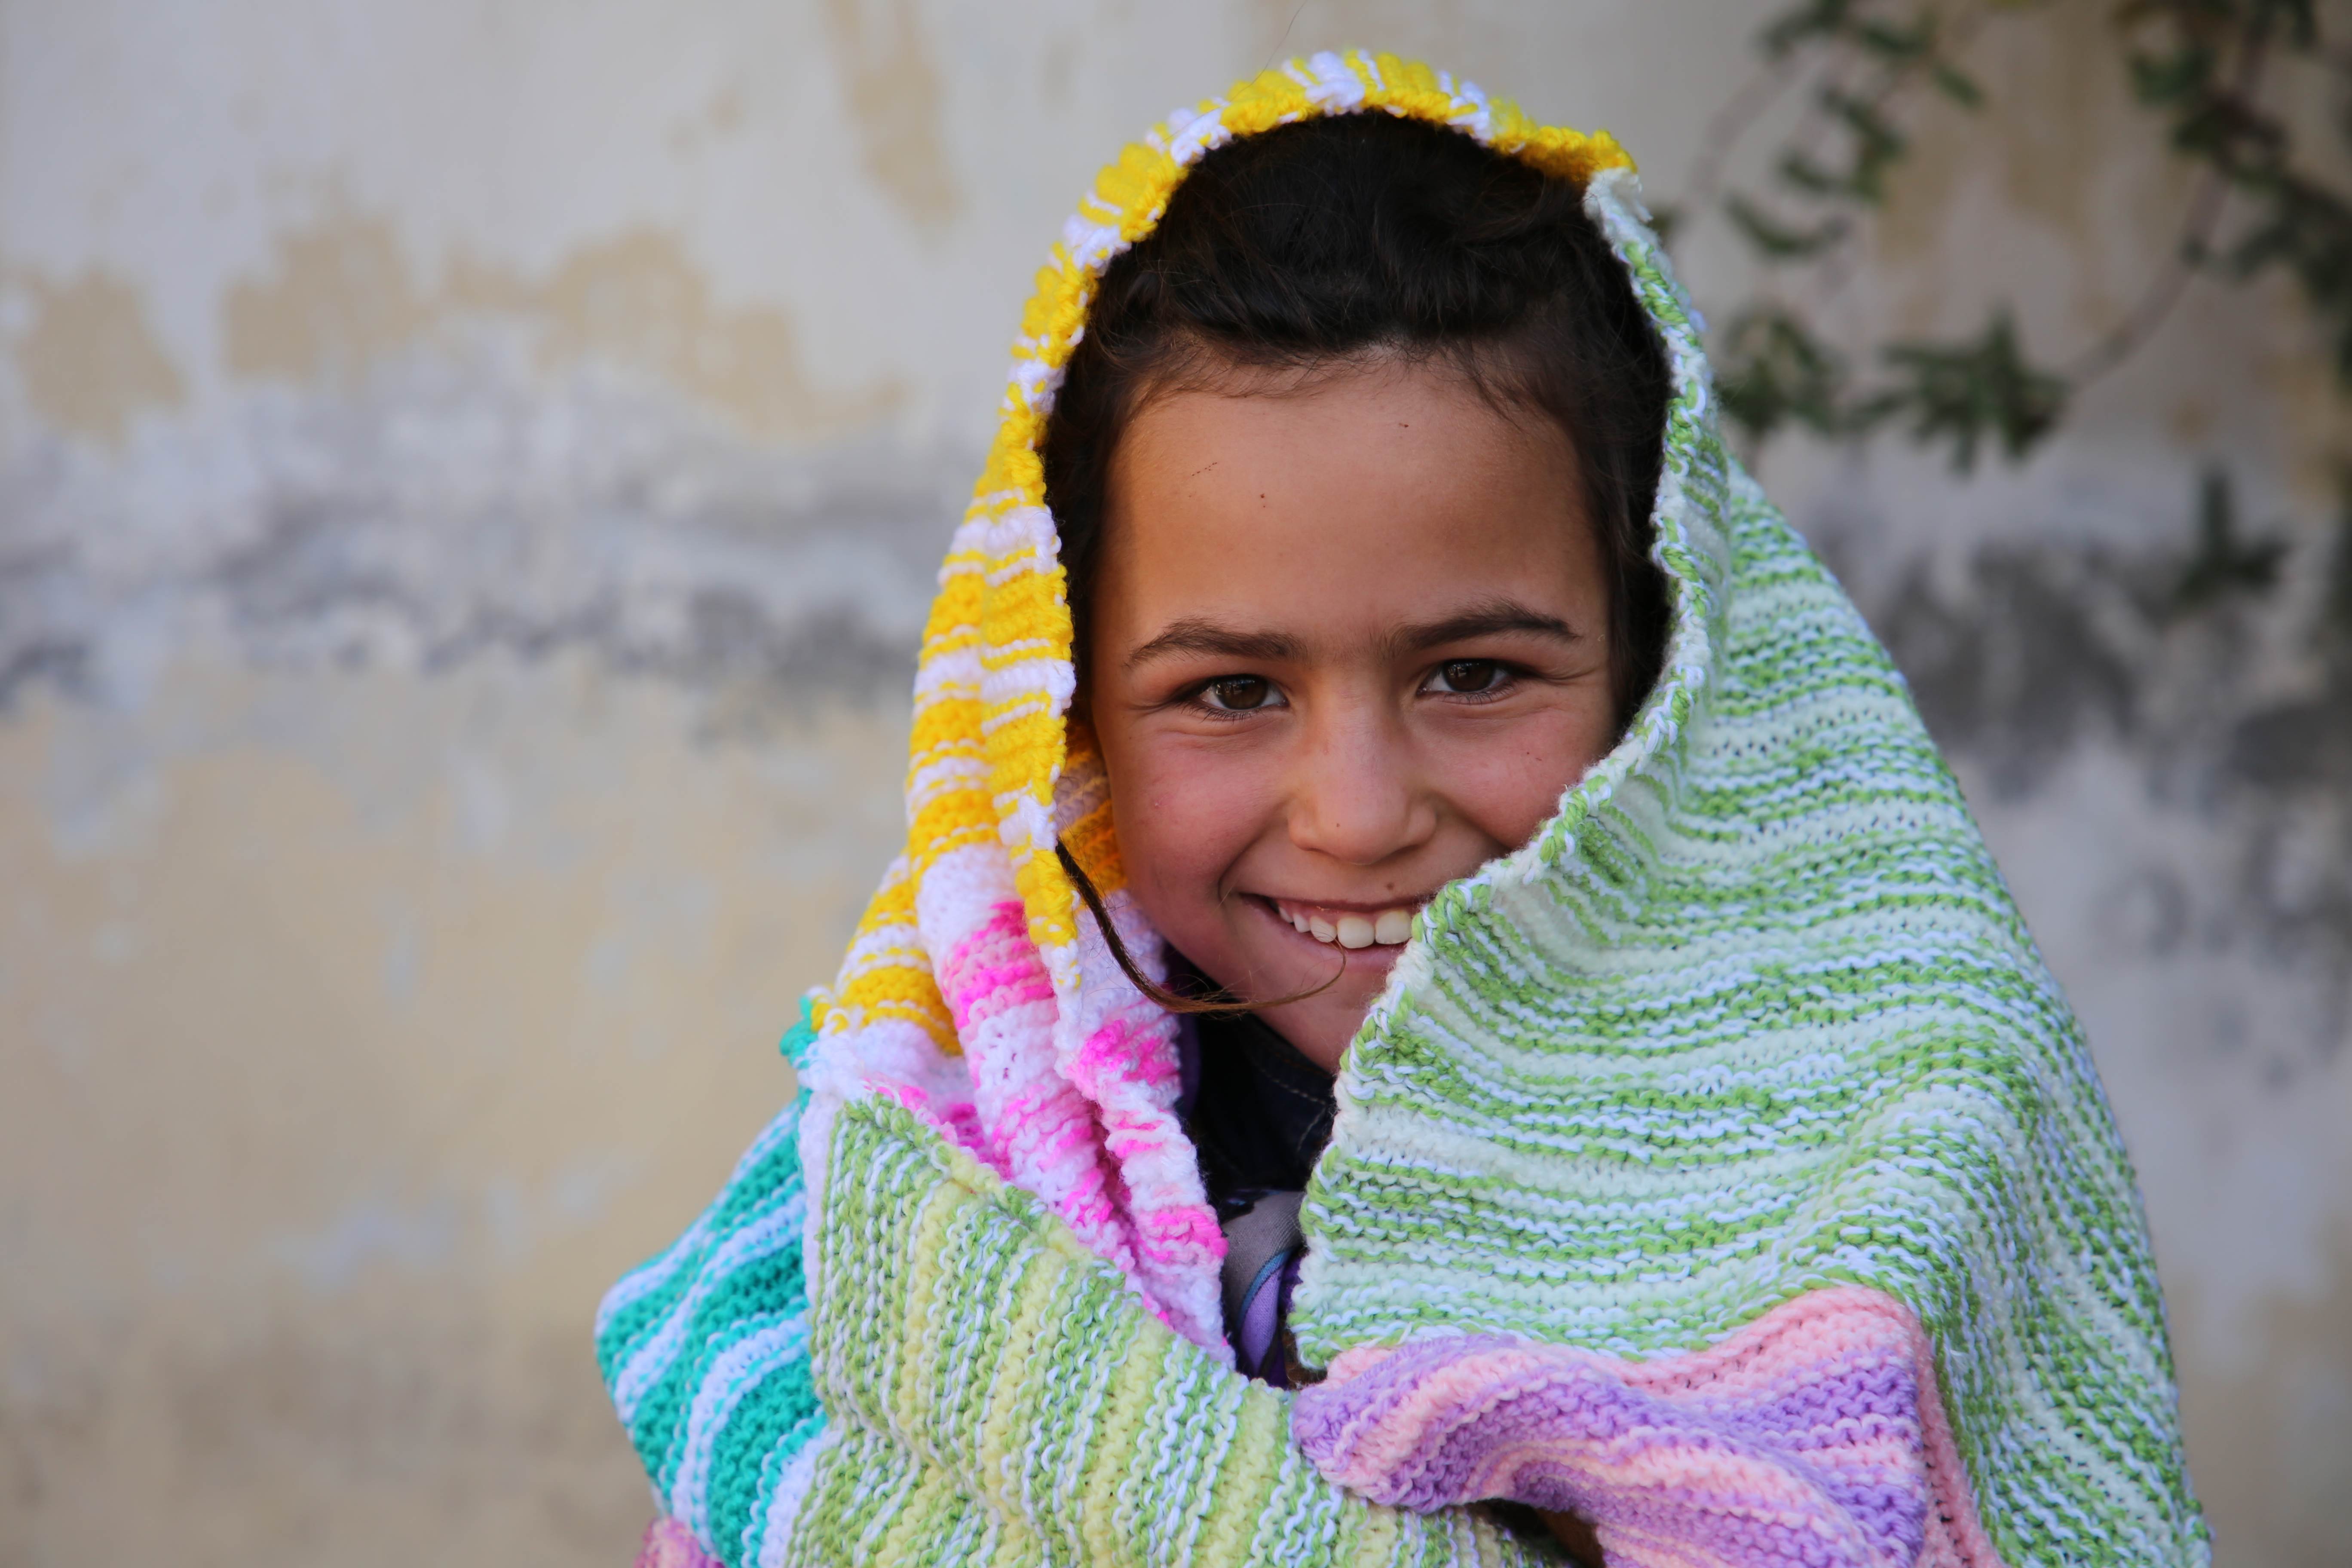 A young girl wrapped in a blanket and smiling